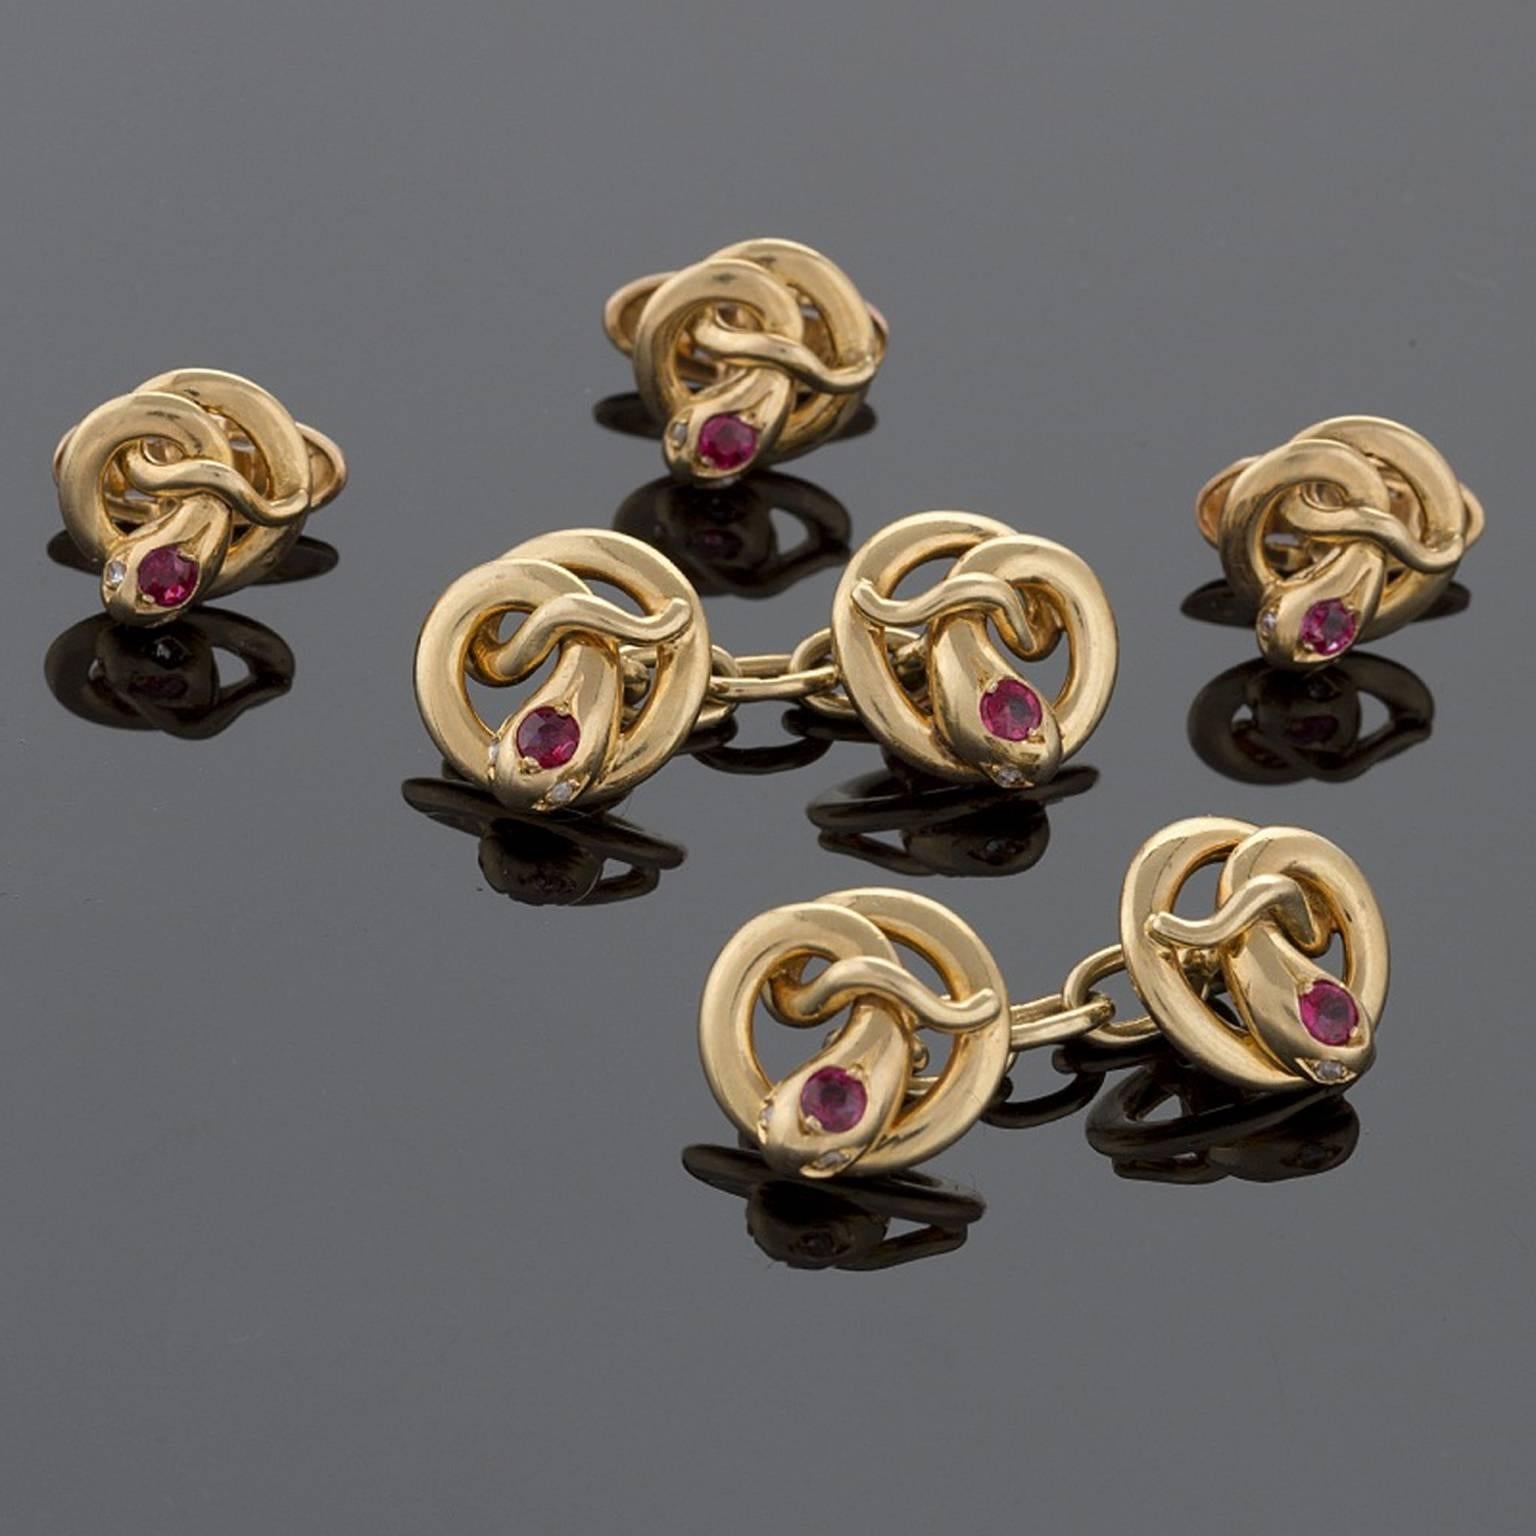 A French Art Nouveau 18 karat gold dress set with rubies. This dress set has double sided cuff links with 3 matching dress studs. The cuff links have 7 round-cut rubies with an approximate total weight of .35 carat. Original box, signed, 